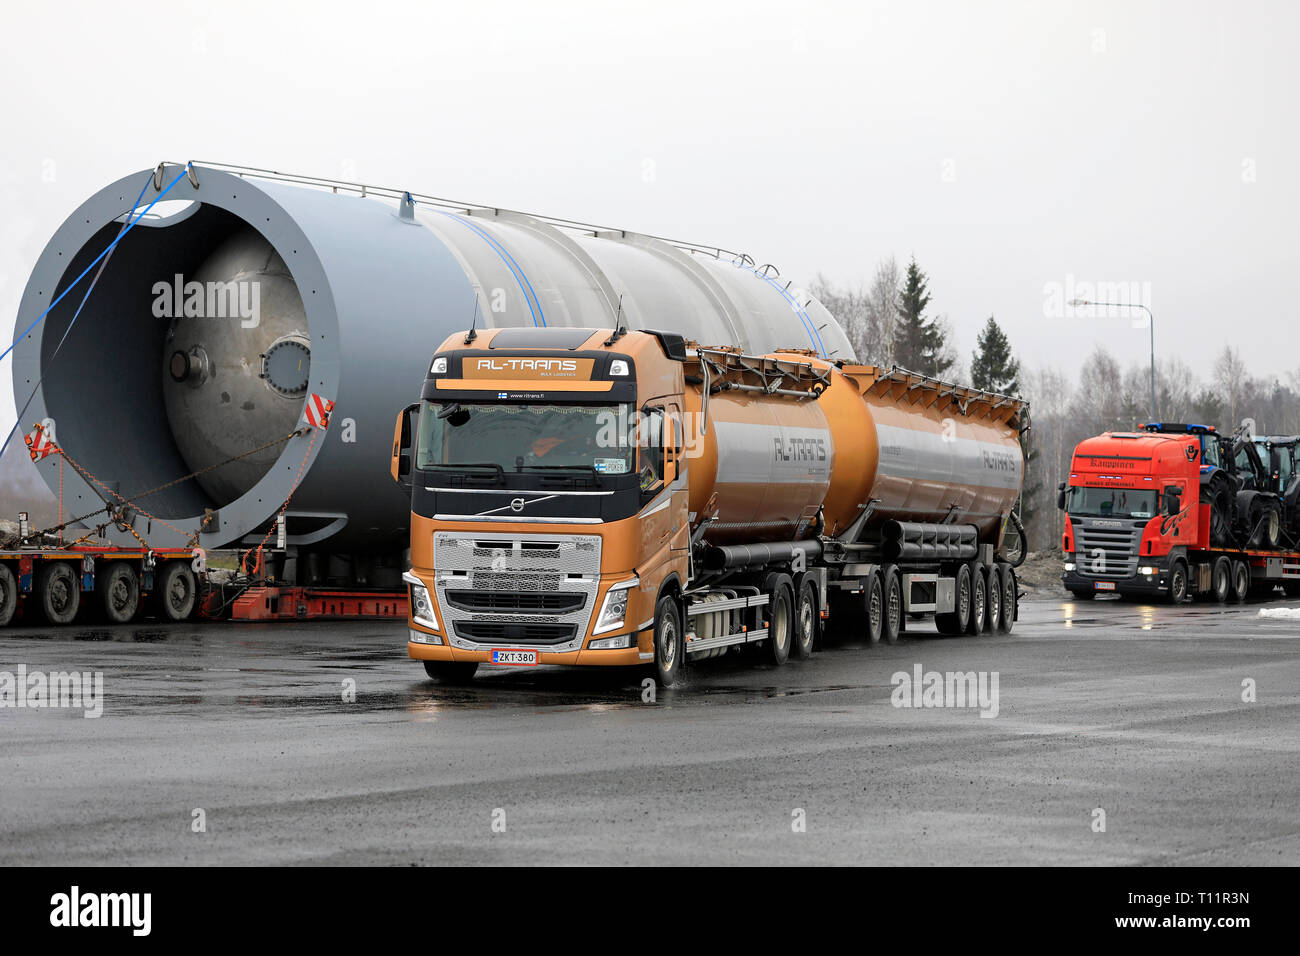 Forssa, Finland - March 16, 2019: Volvo FH 500 truck RL-Trans and 6-axle trailer leaves truck stop with large oversize load parked on the background. Stock Photo